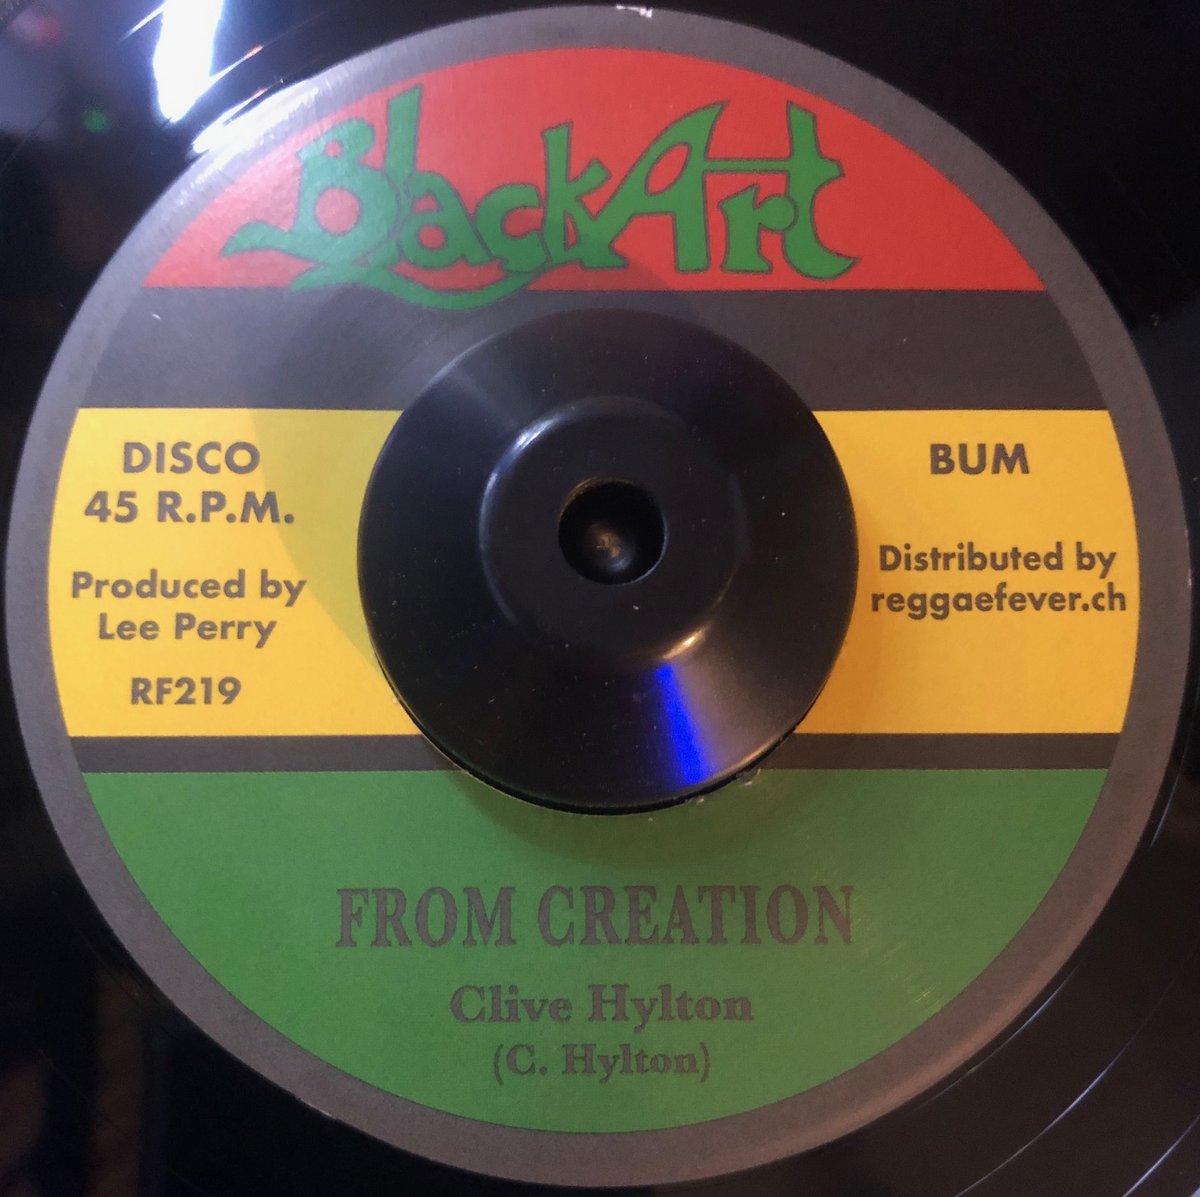 Black Art-7'-From Creation / Clive Hylton + Creation Dub / Upsetters jahwaggysrecords.com/en/brand-new-7…